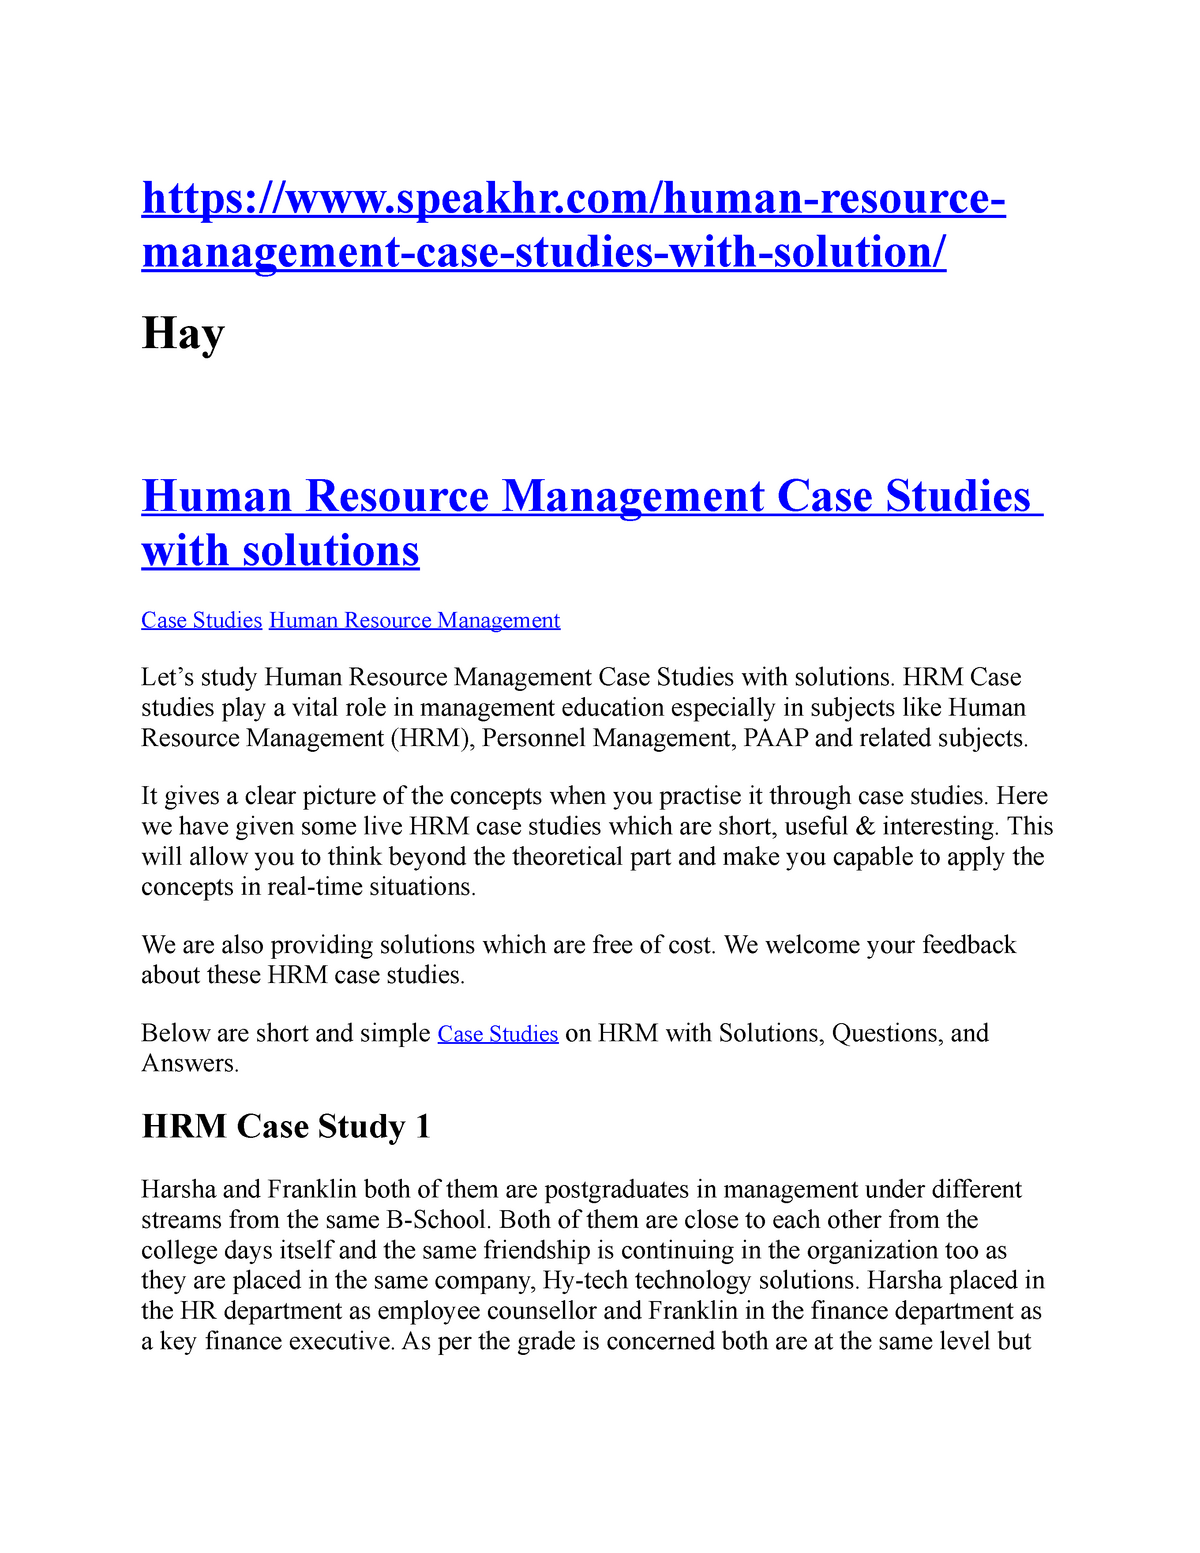 case study for hrm with solutions